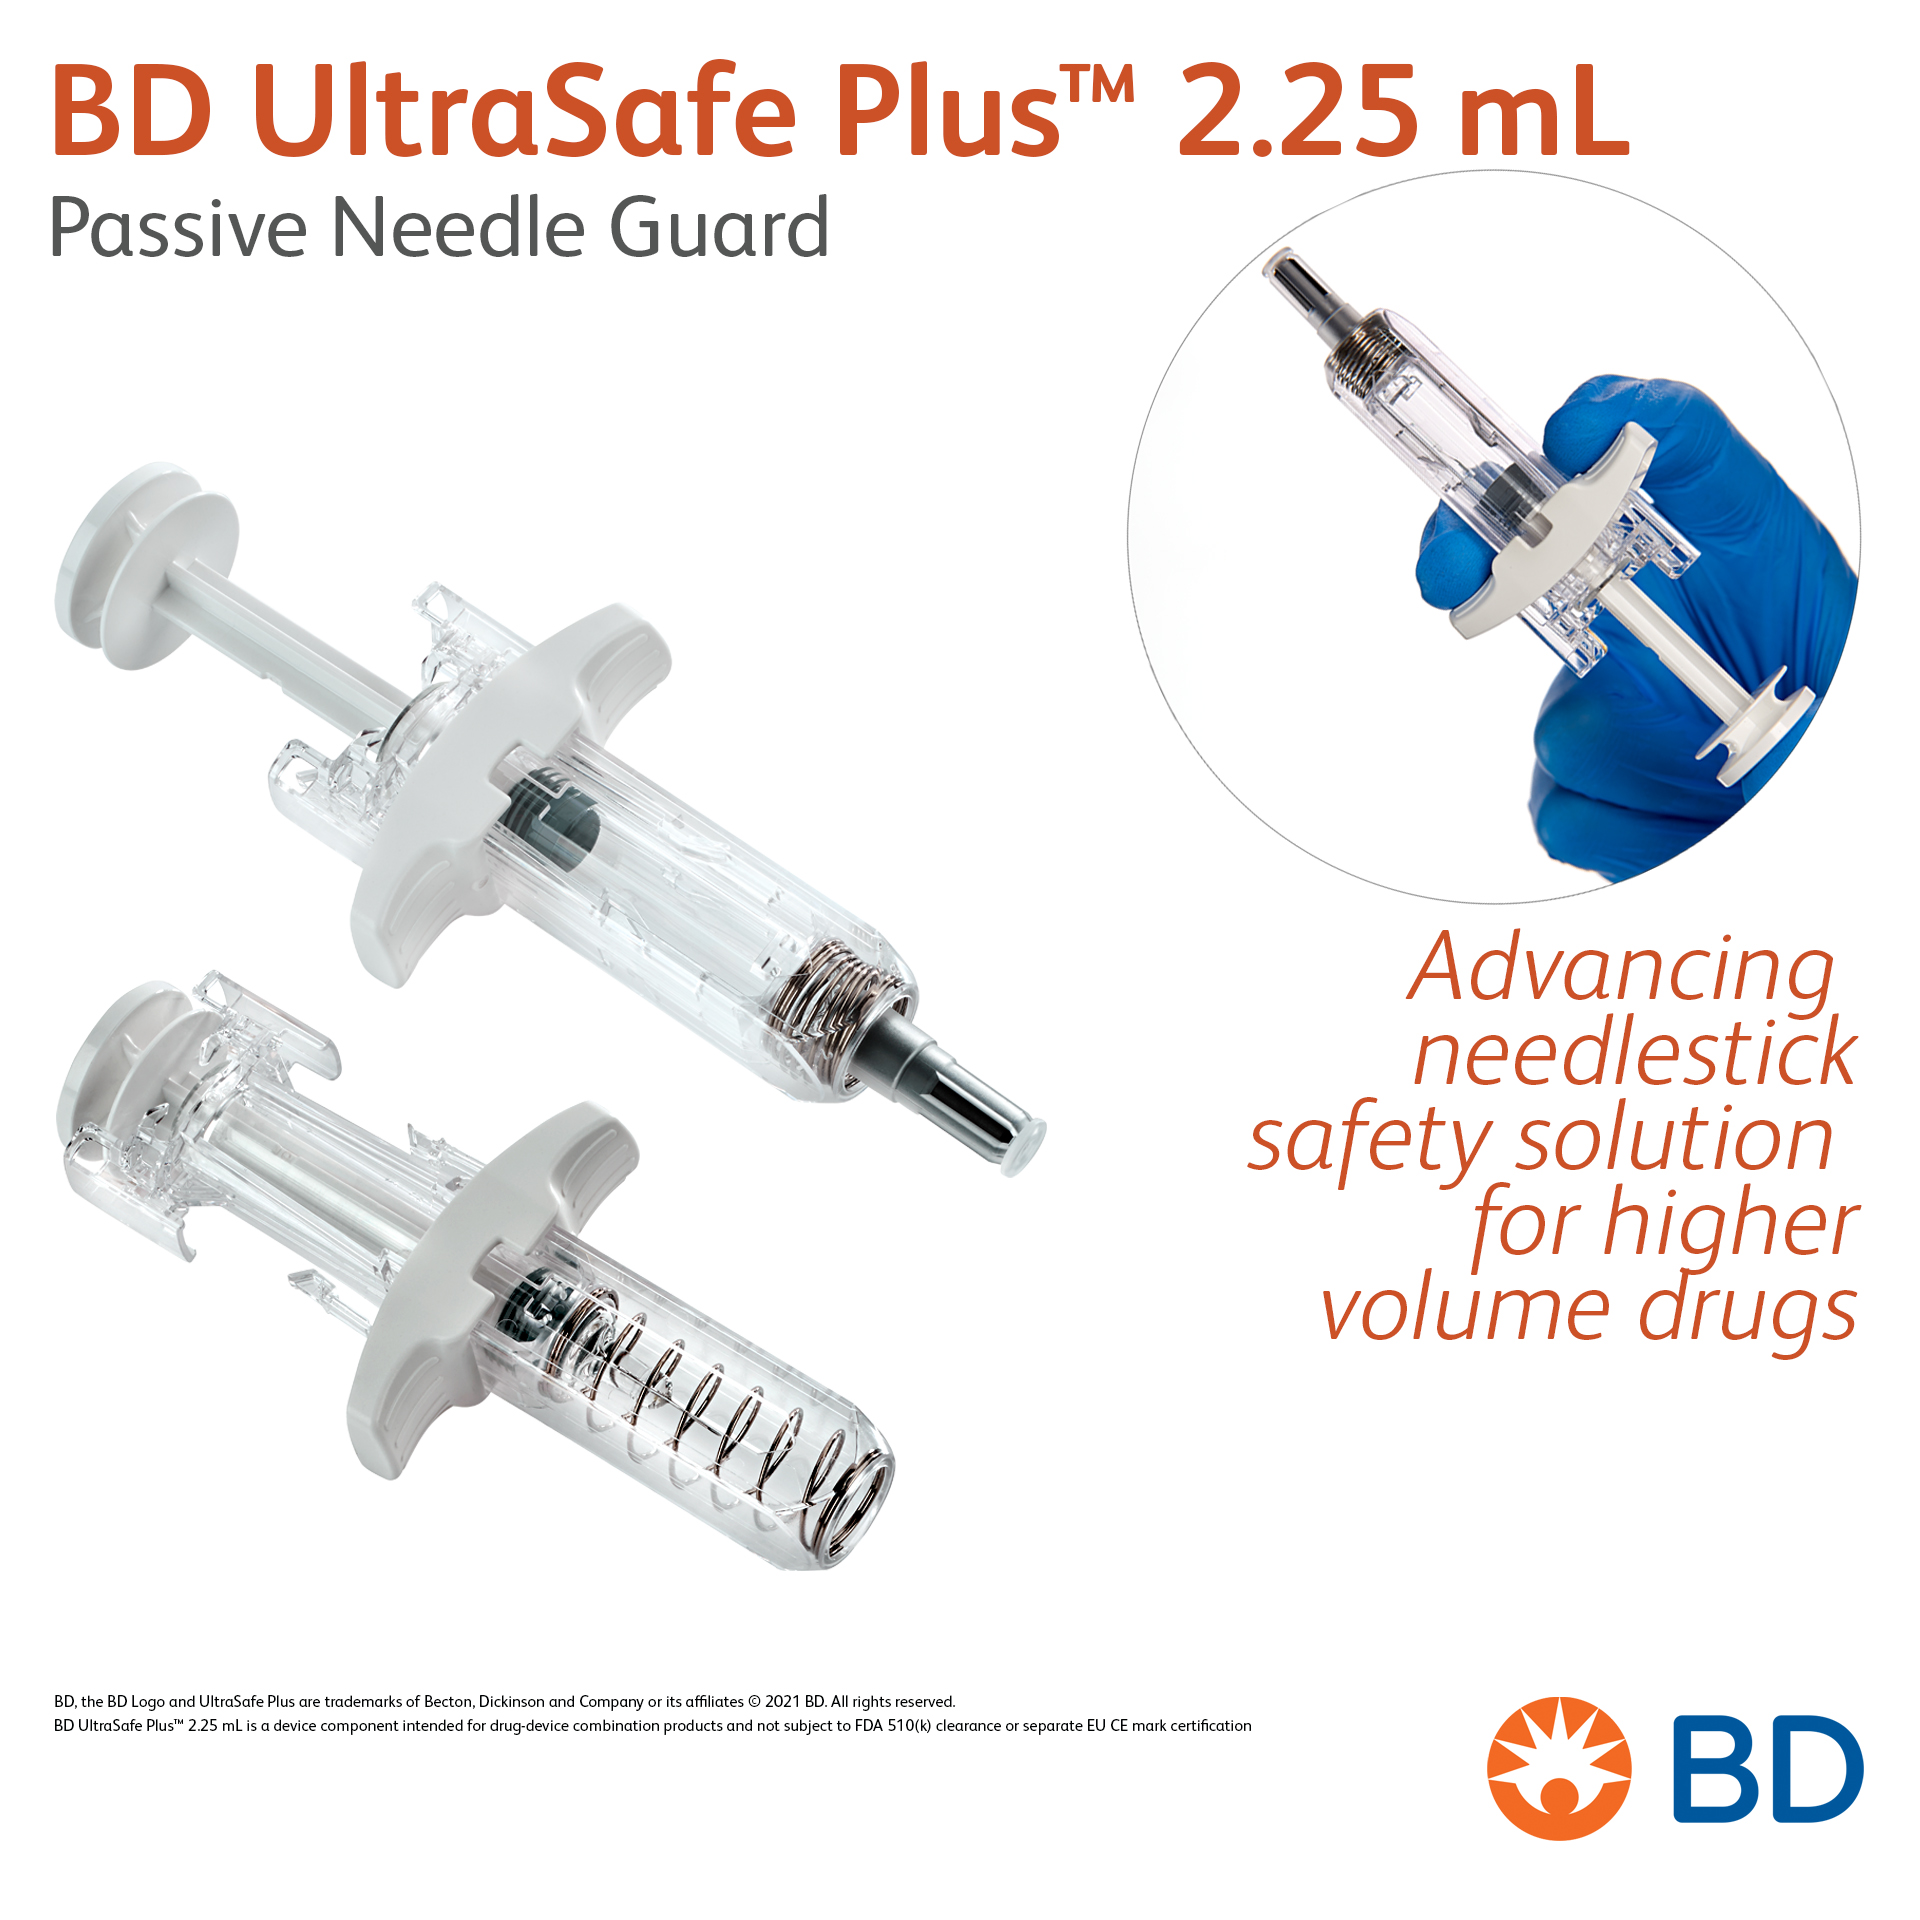 BD UltraSafe Plus™ 2.25 mL Passive Needle Guard - Advancing needlestick safety solution for higher volume drugs